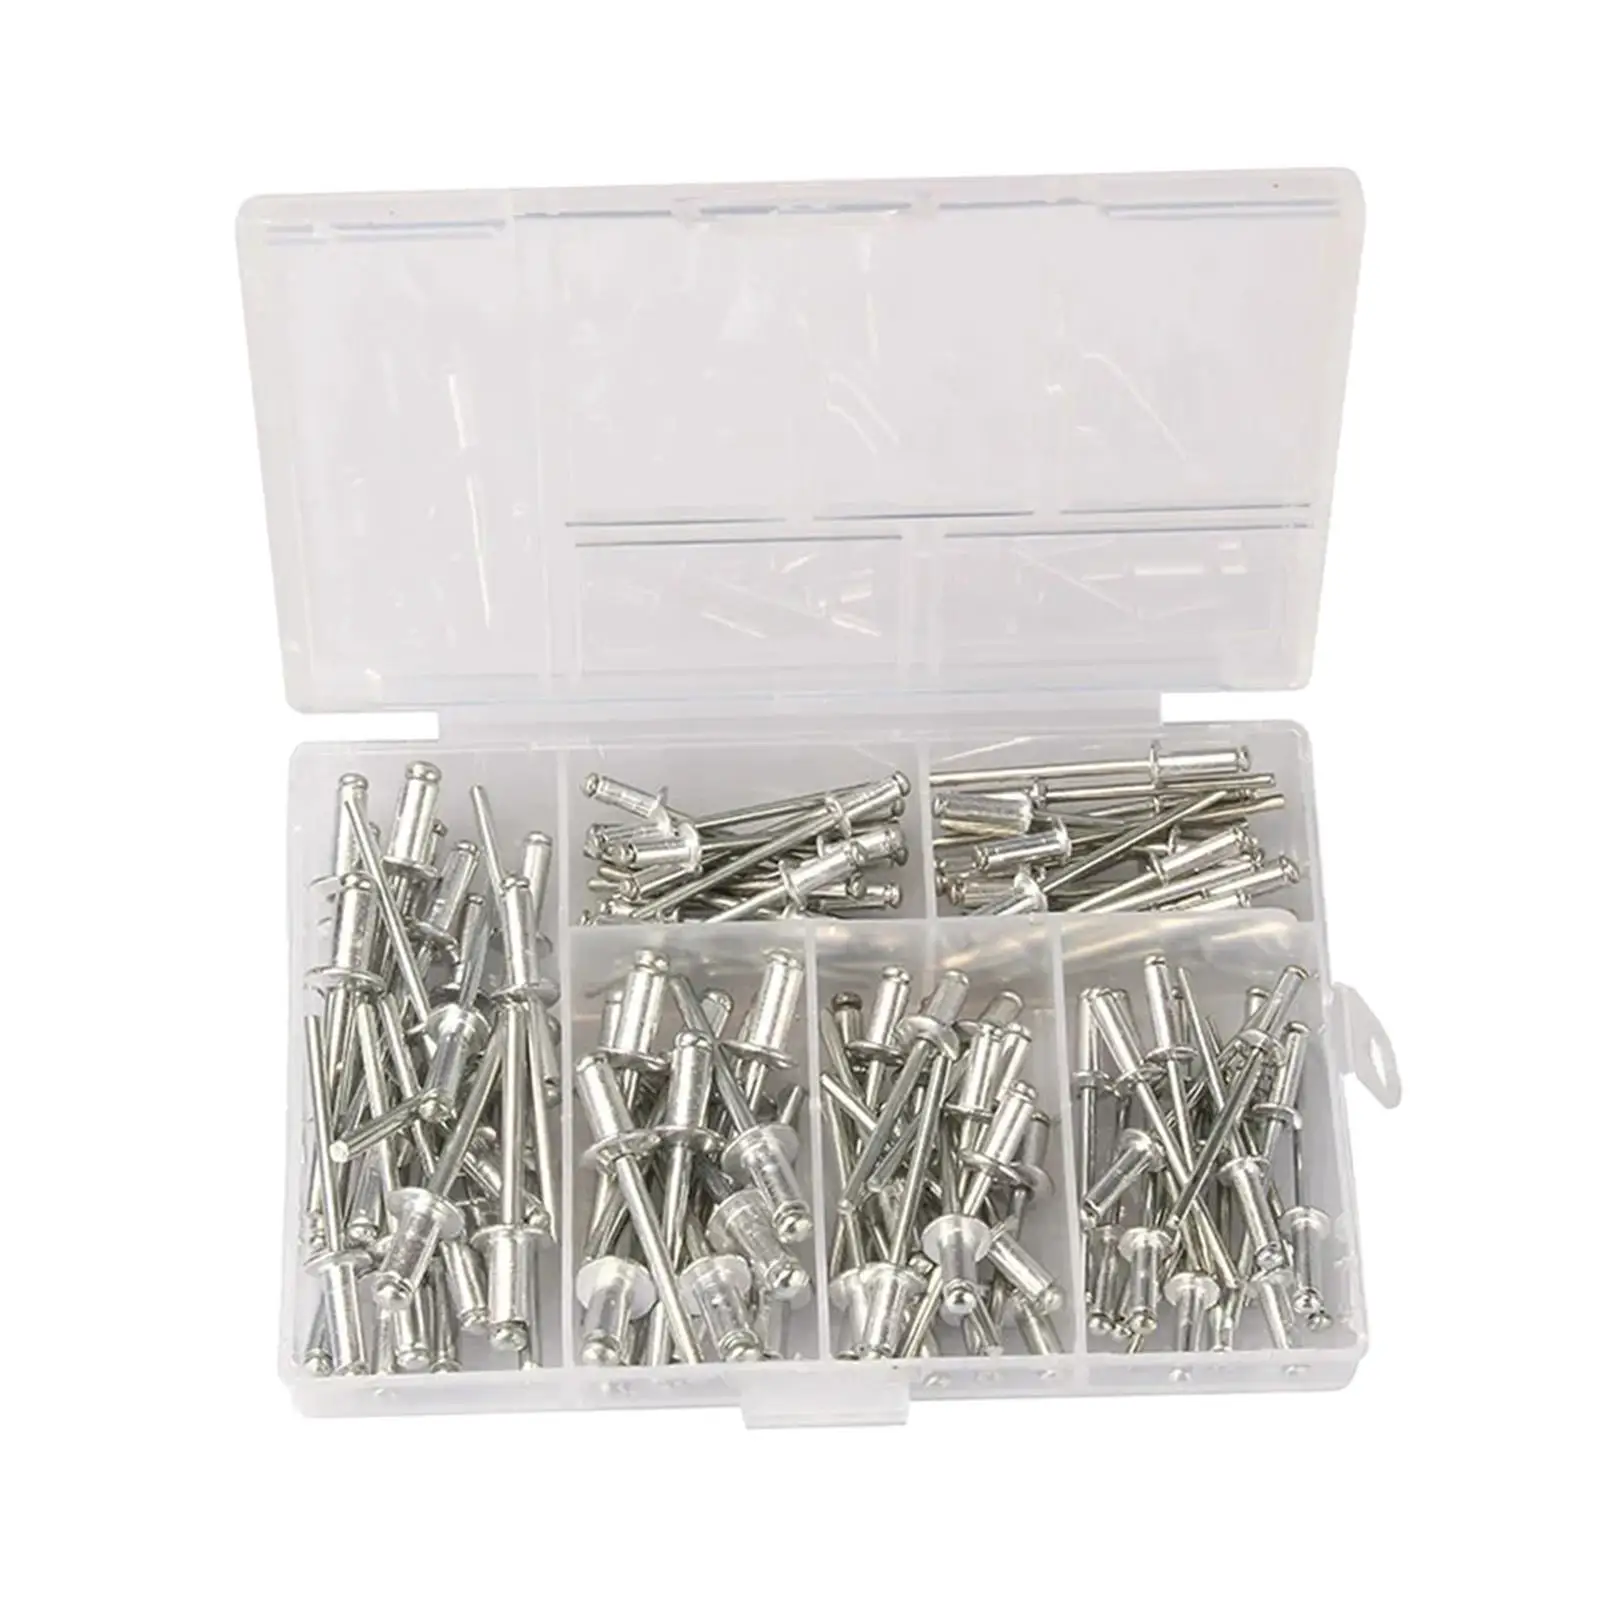 120 Pieces Blind Rivets for Installing Accessories Low Tensile and Shear Strength Portable Aluminum Rivets Heavy Duty Fastener